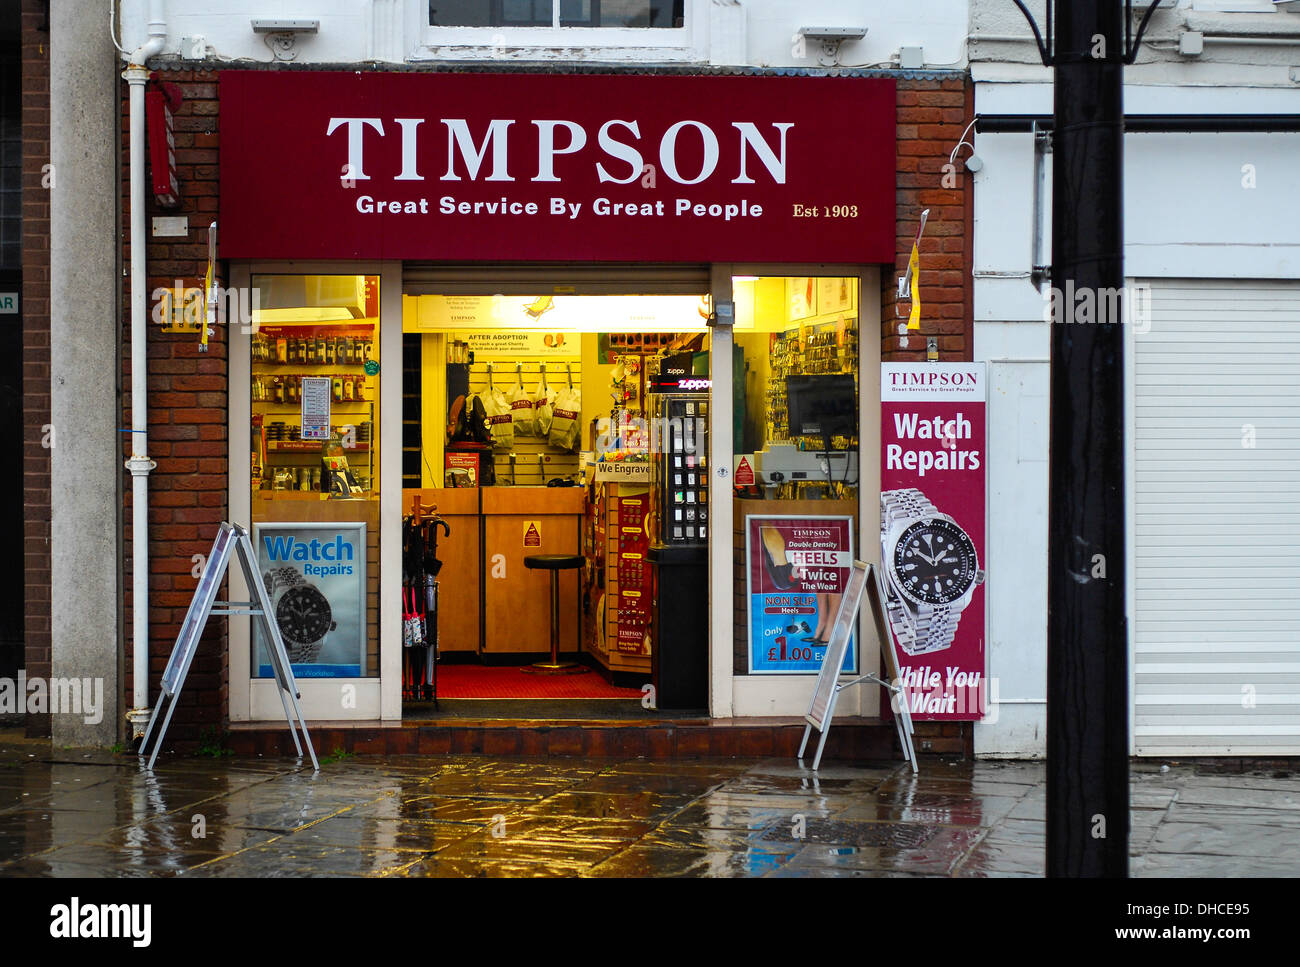 Timpson Shoe High Resolution Stock 